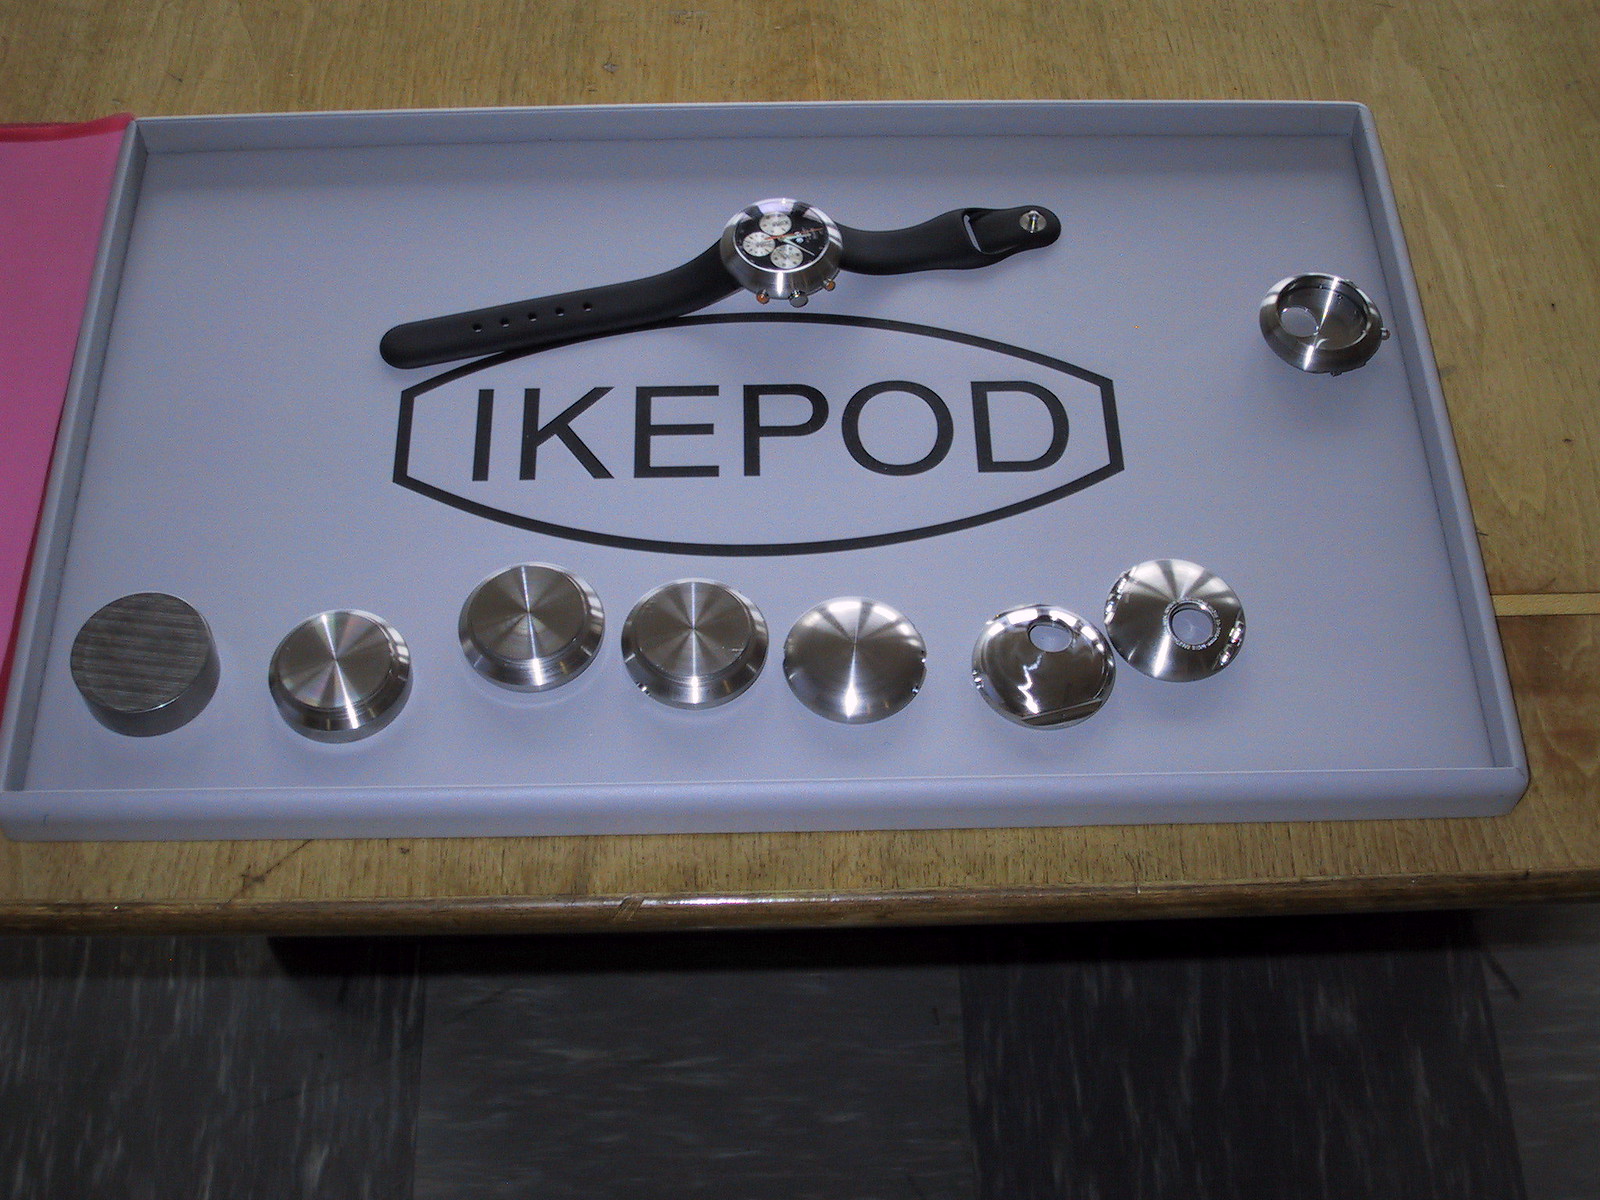 13 Ikepod Watch Stages of Production